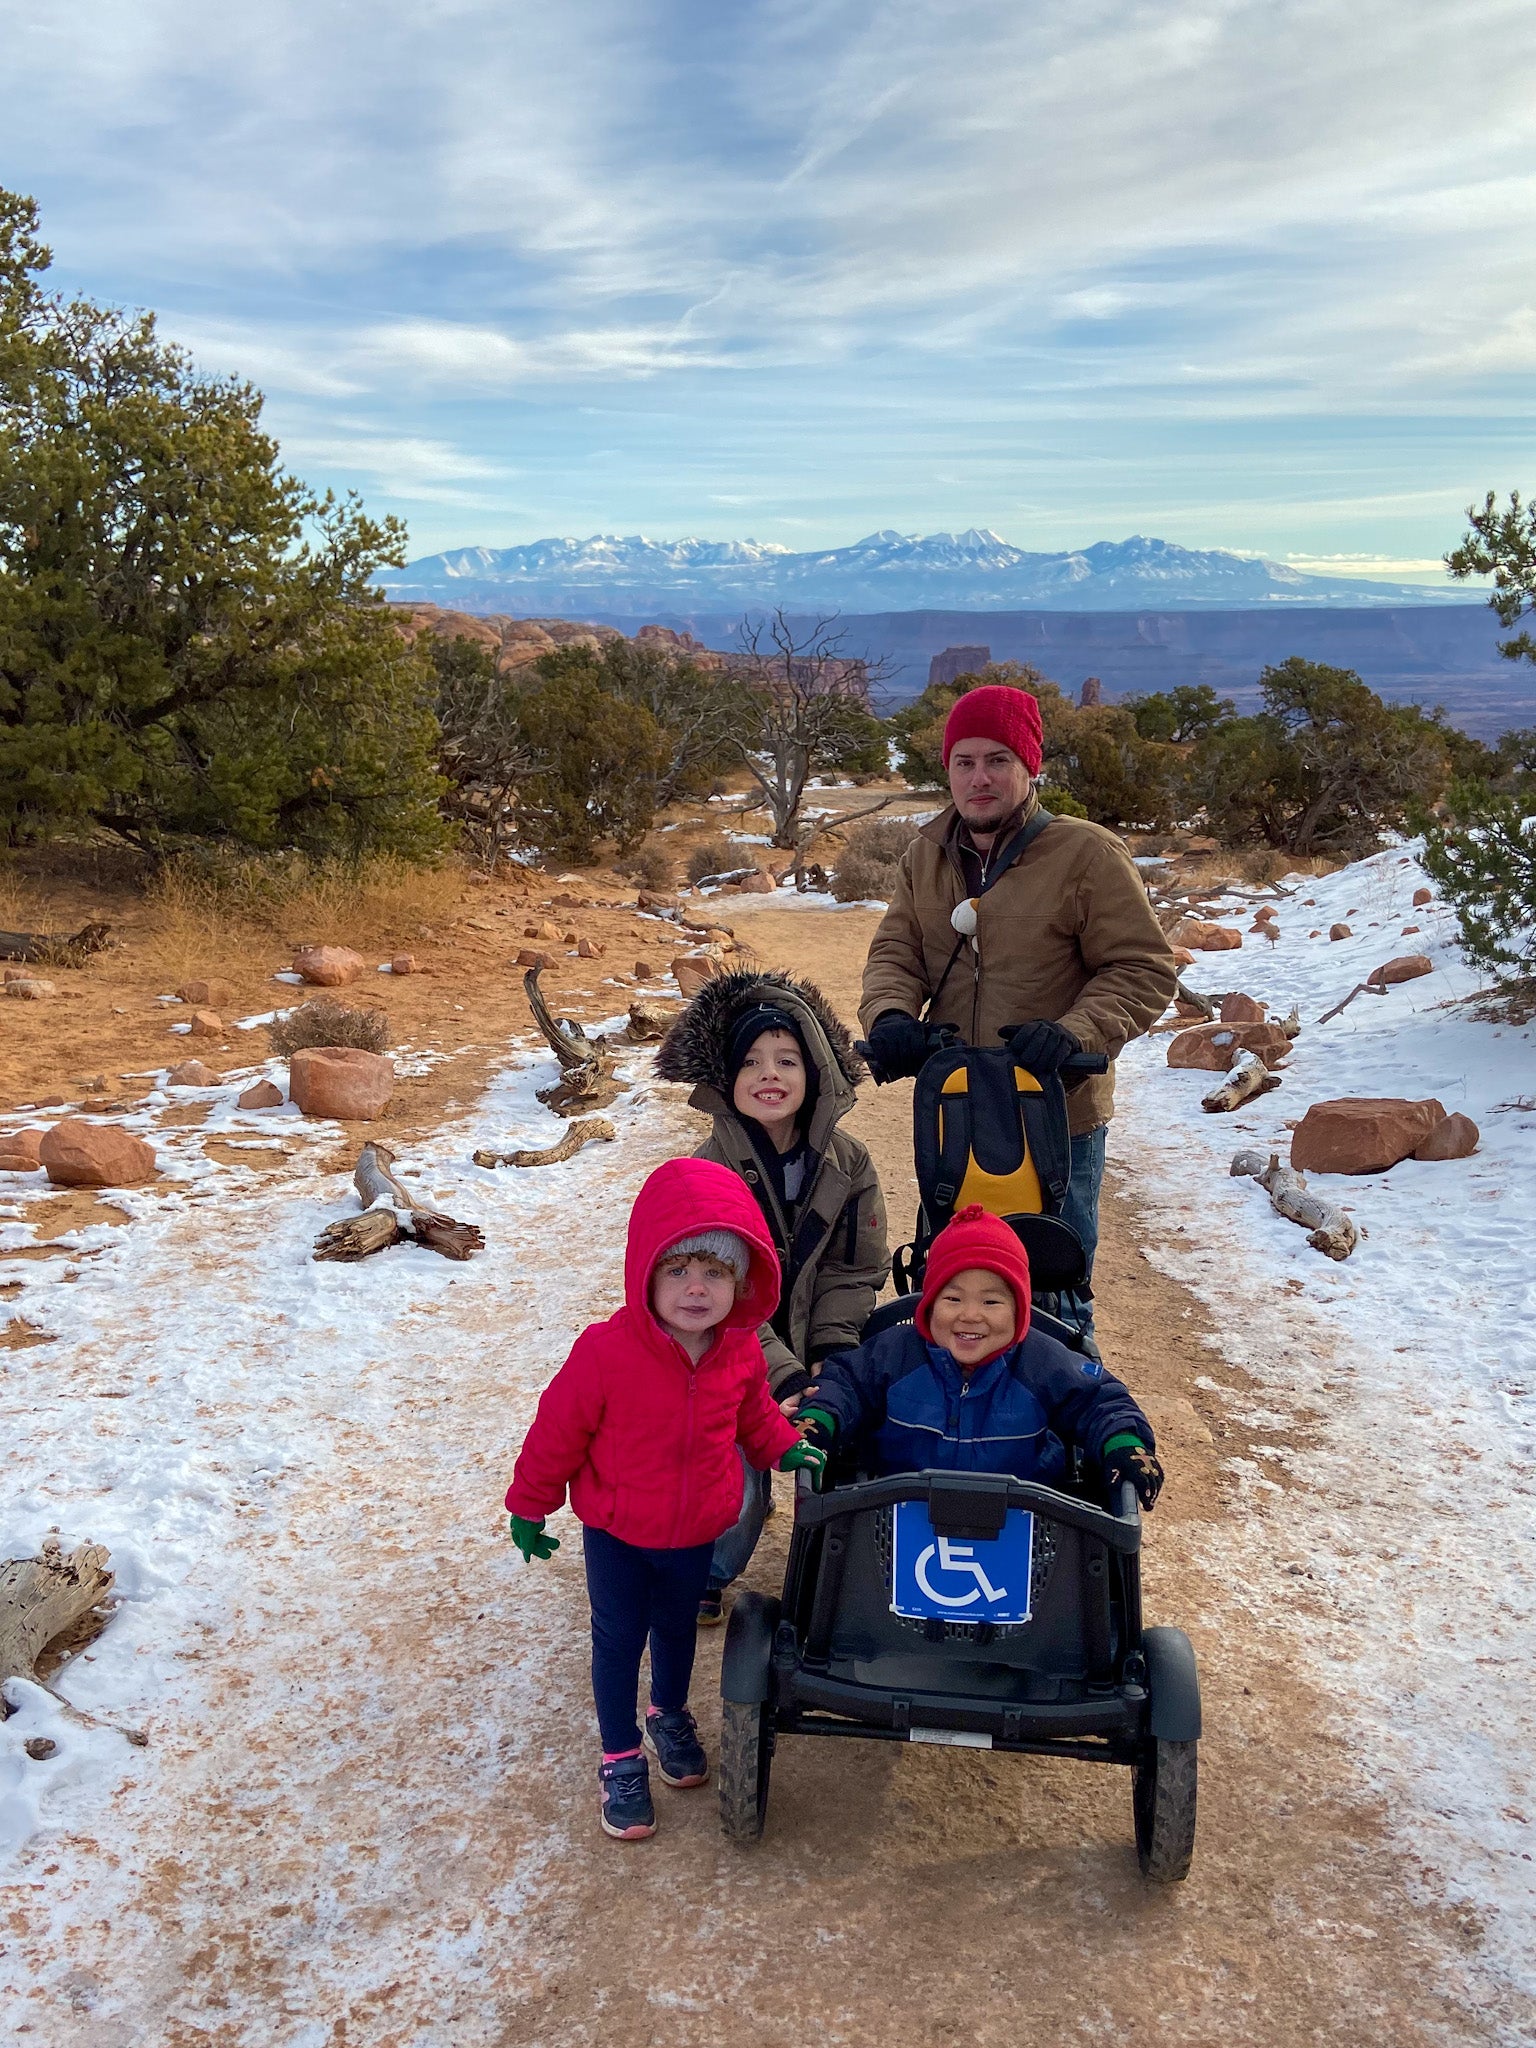 A PARENT’S ADVICE FOR GETTING OUTSIDE WITH A SPECIAL NEEDS KID - Wheelchair